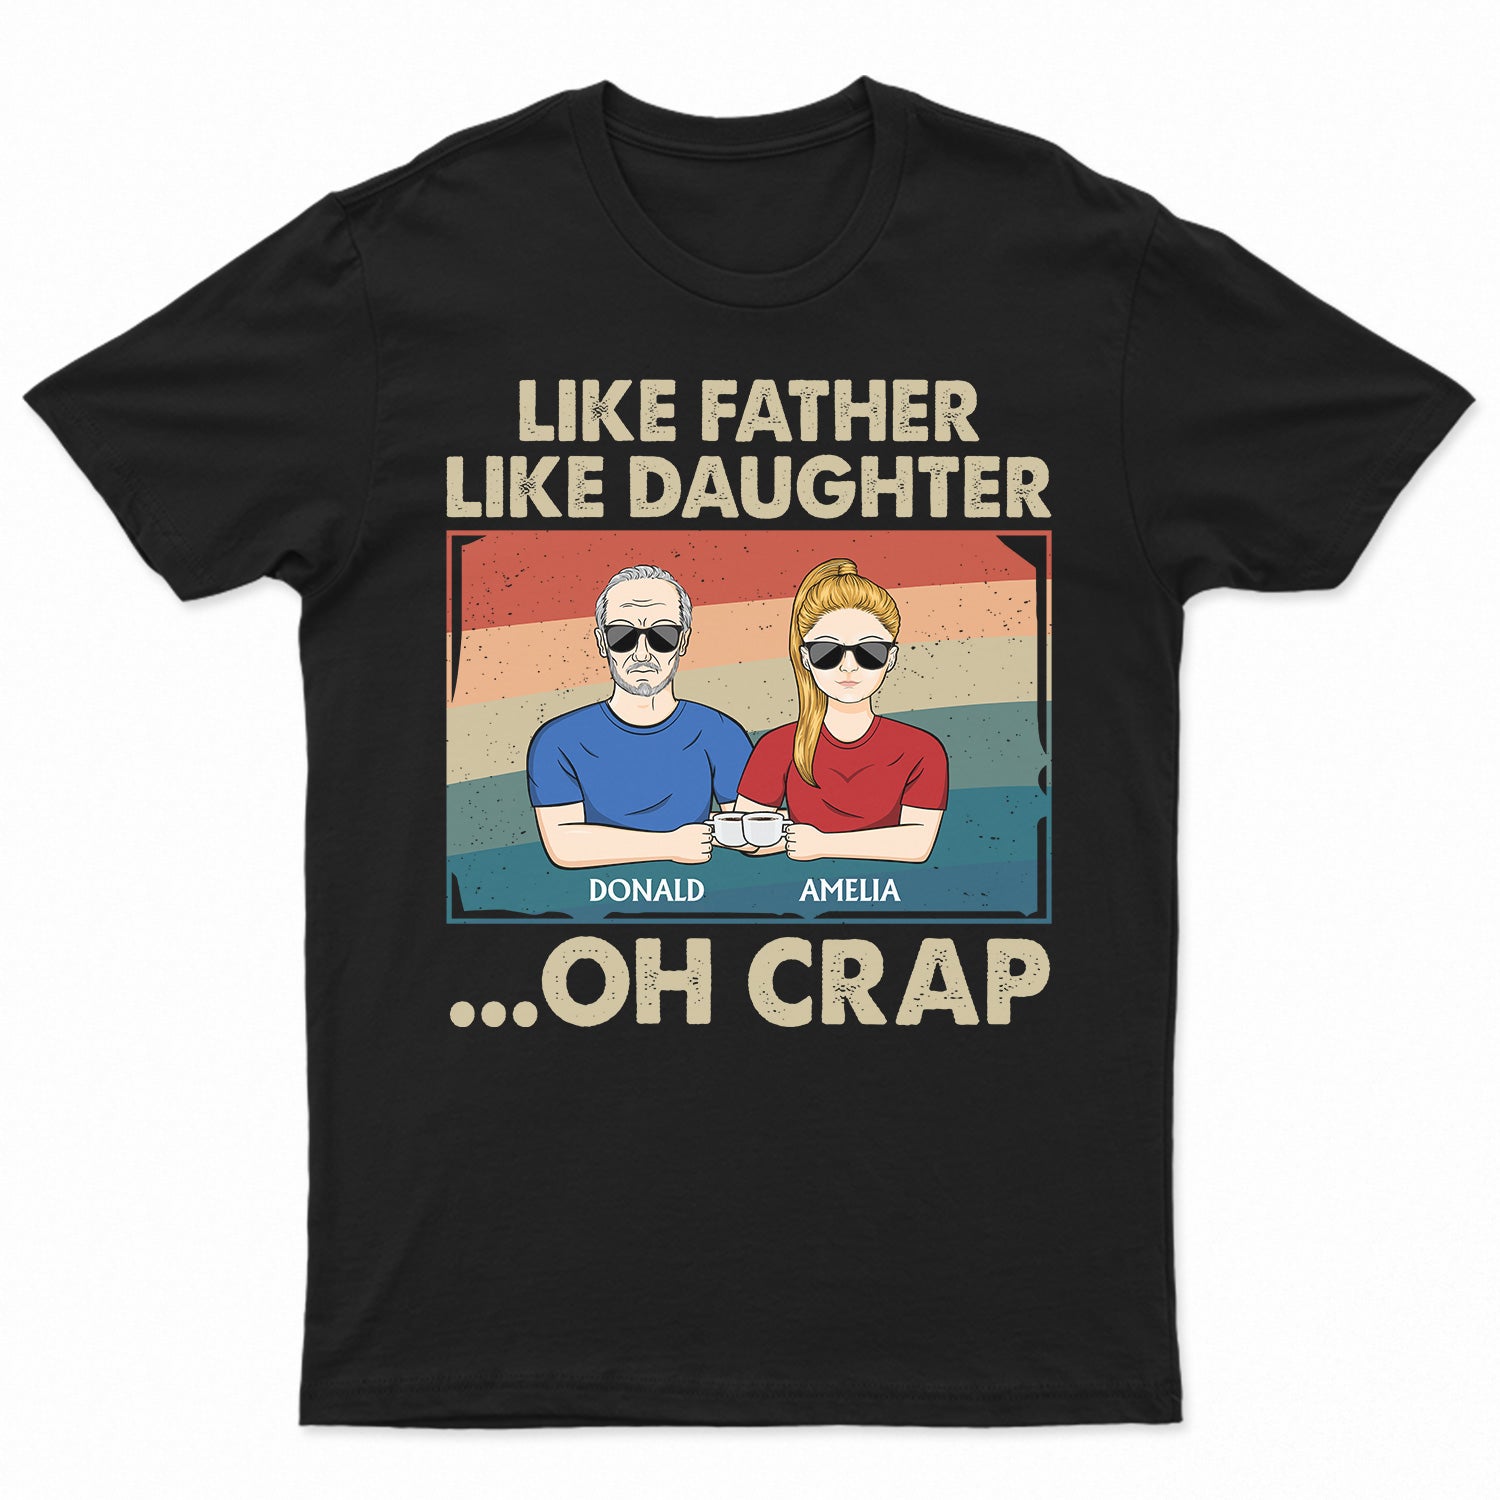 Like Father Like Daughter - Funny Gift For Dad, Father, Grandpa - Personalized T Shirt